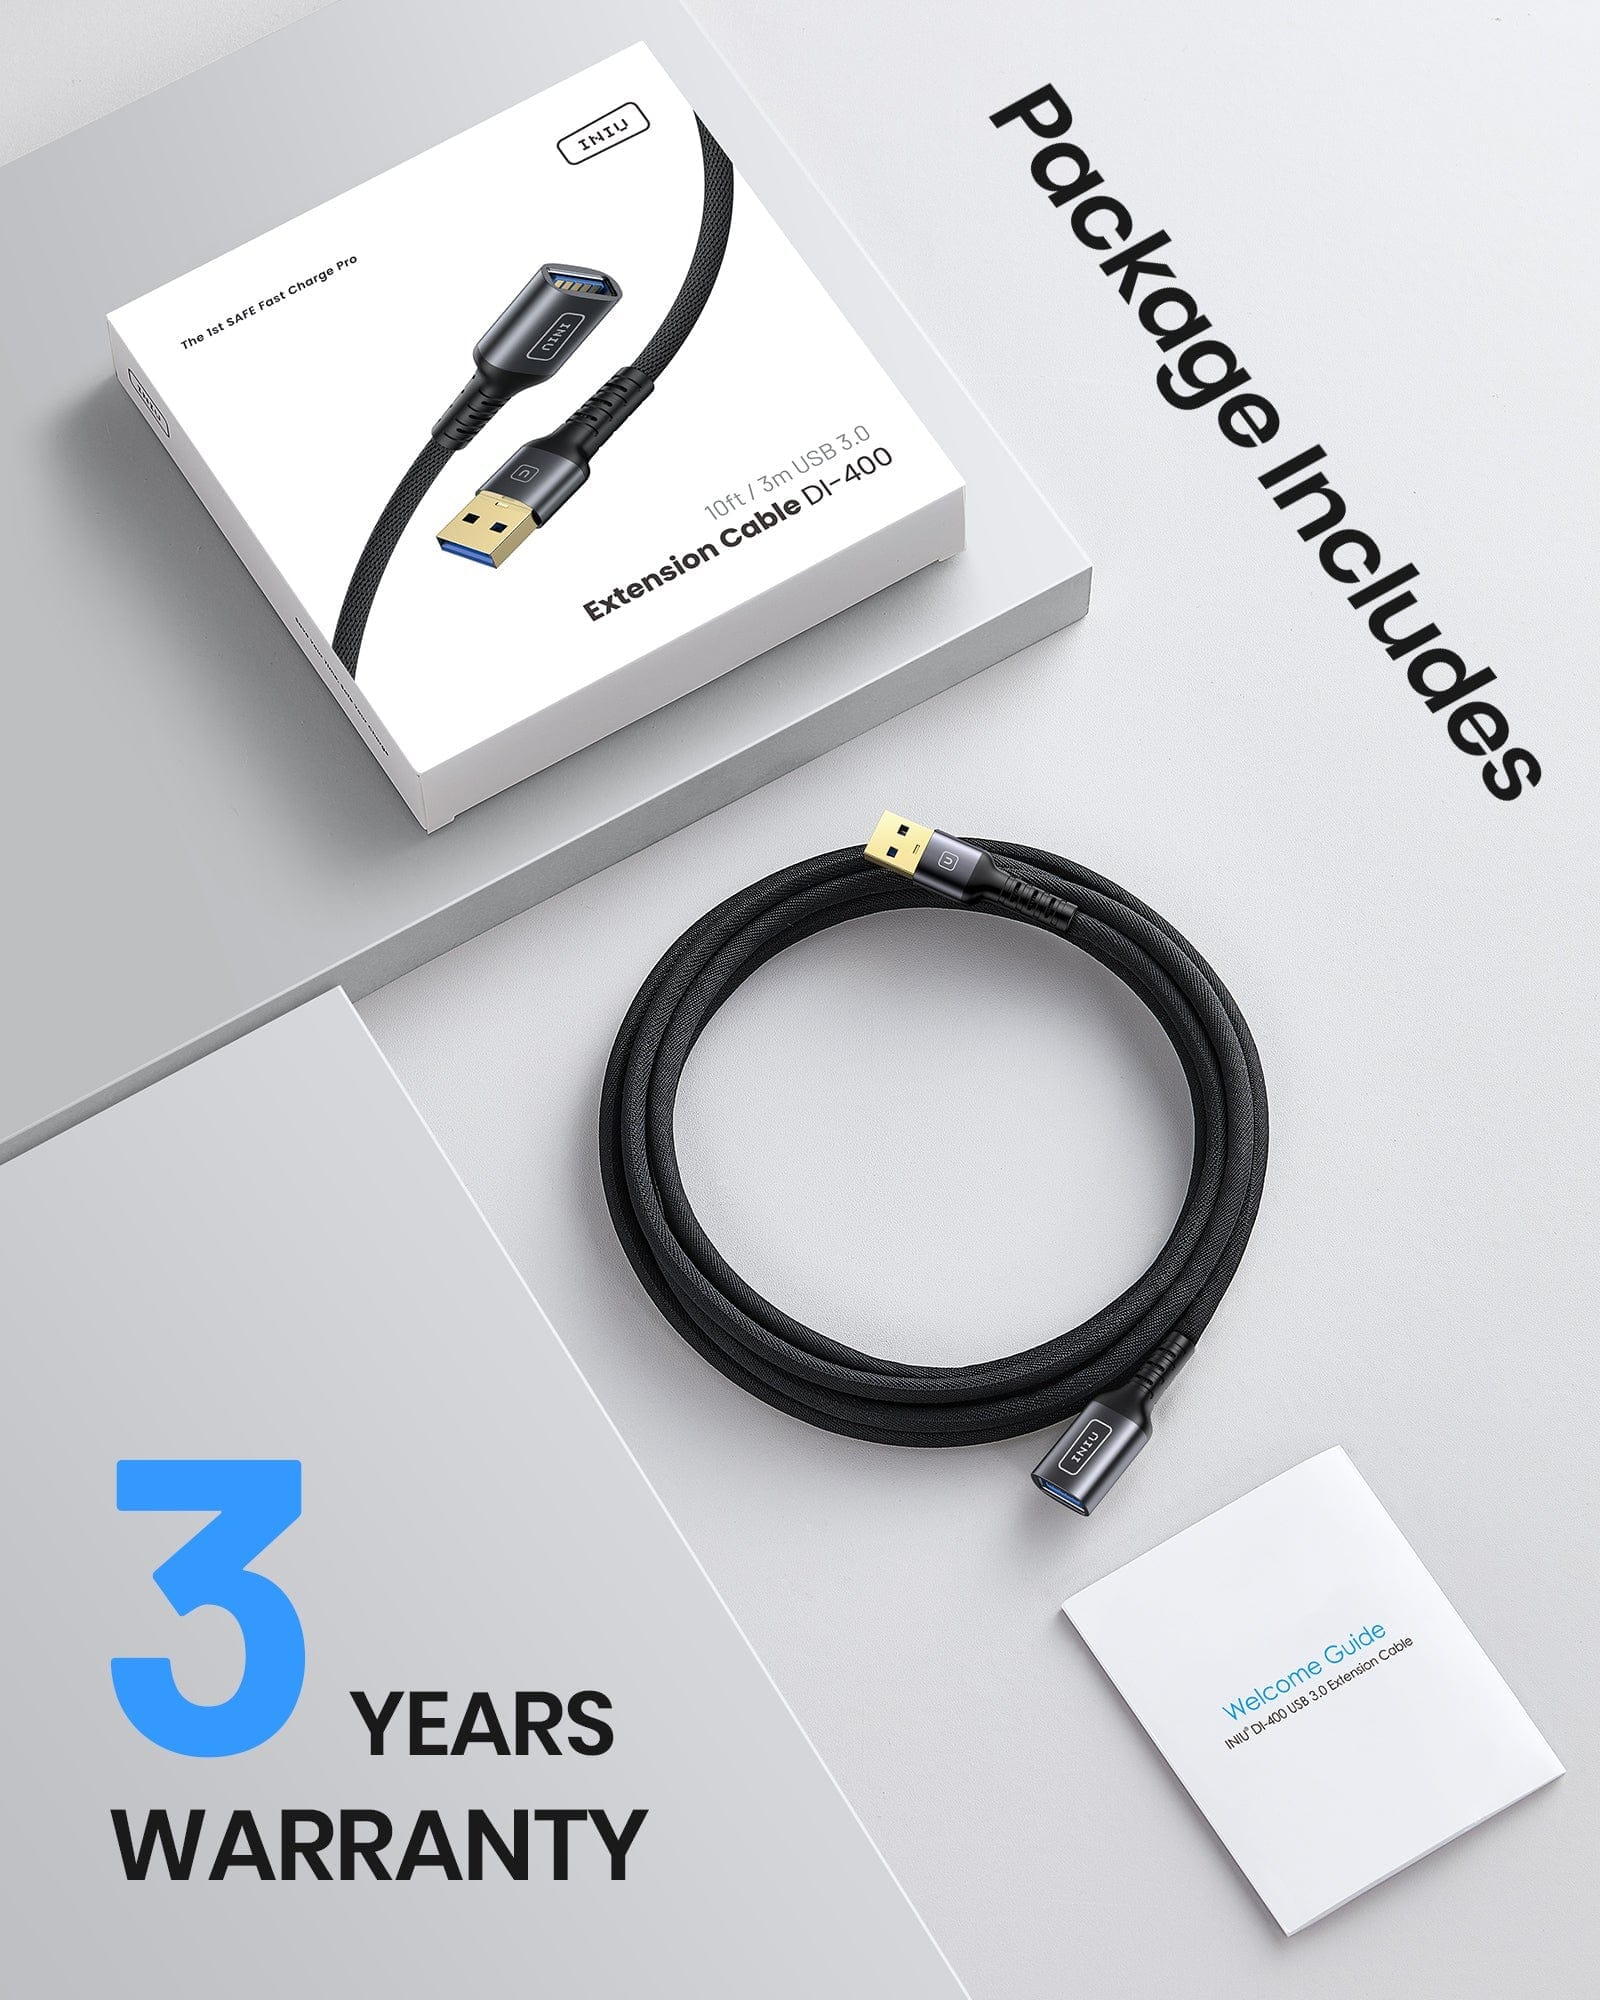 Package Includes: INIU 5Gbps USB 3.0 Extension Cable 【10ft】